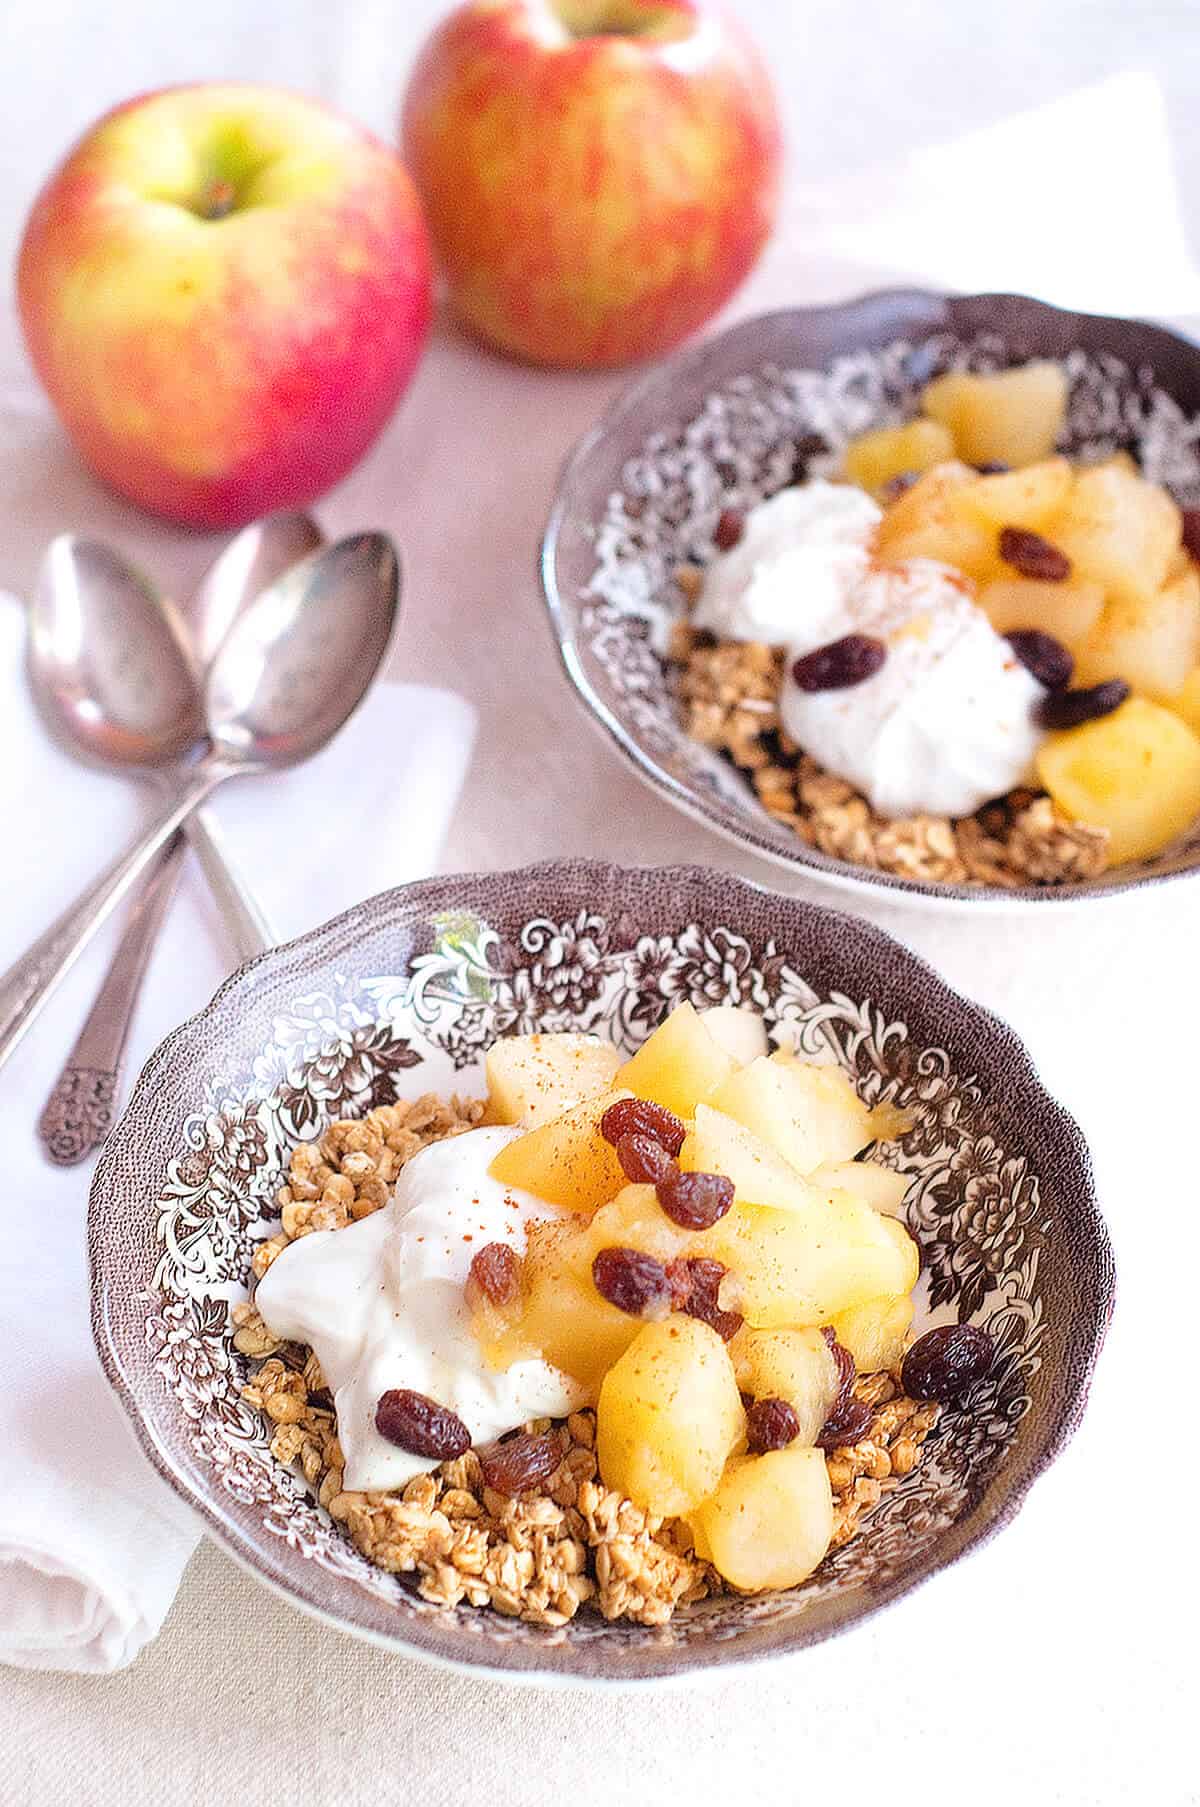 Apple Pear Compote over granola in a serving bowl.